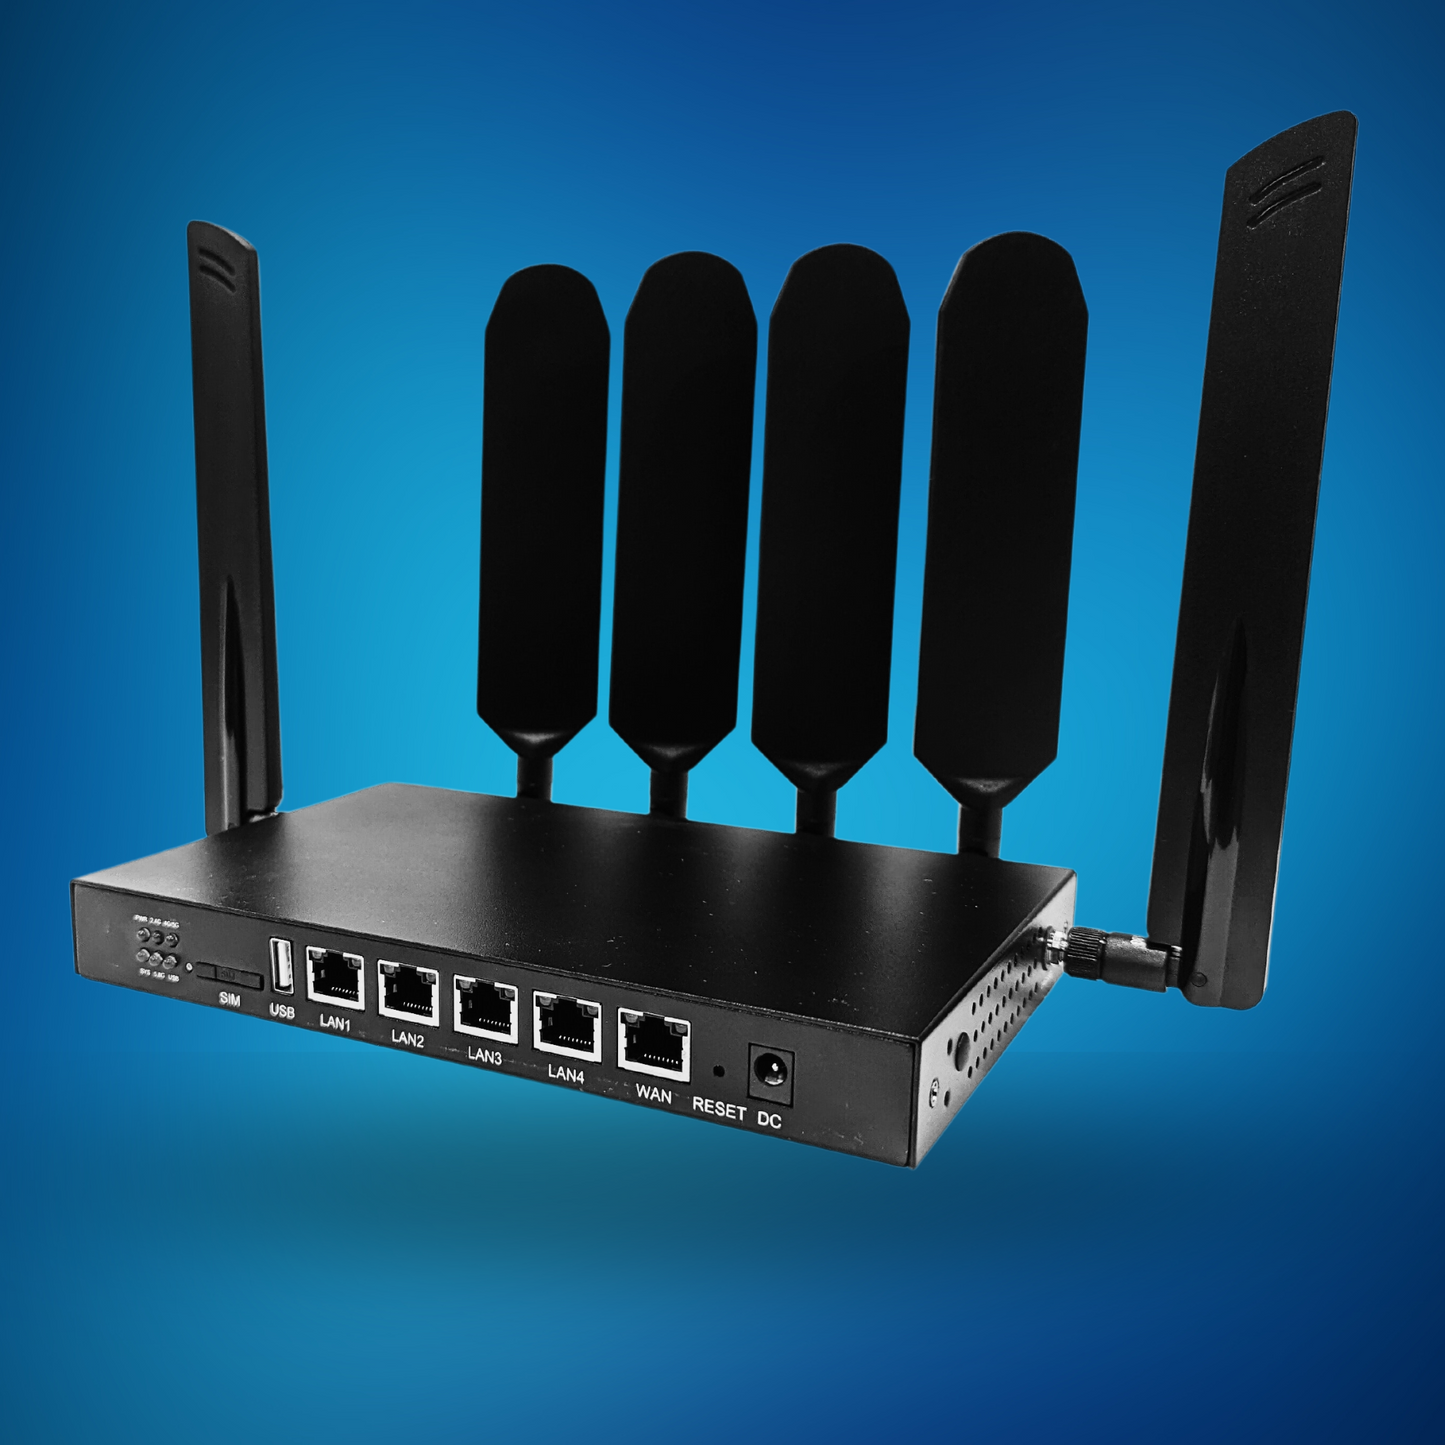 Refurbished 5G Pro Unlocked Dual-Band OpenWrt Wireless Router with Upgraded Paddle Antennas